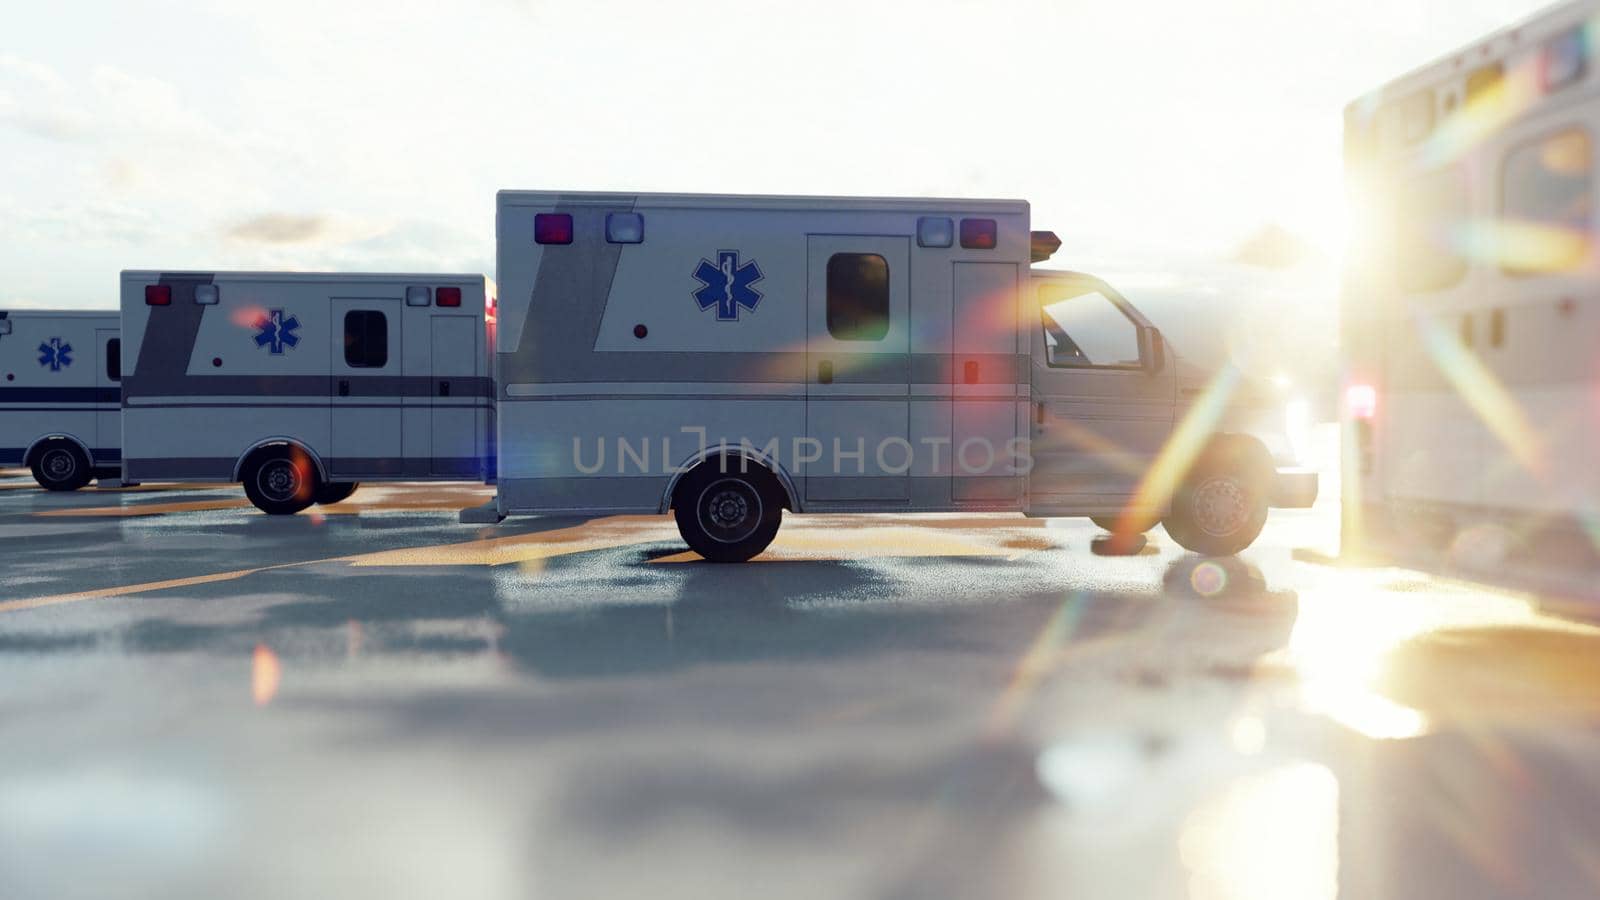 Several ambulances are waiting for a call. Concept of emergency medical services. 3D Rendering by designprojects